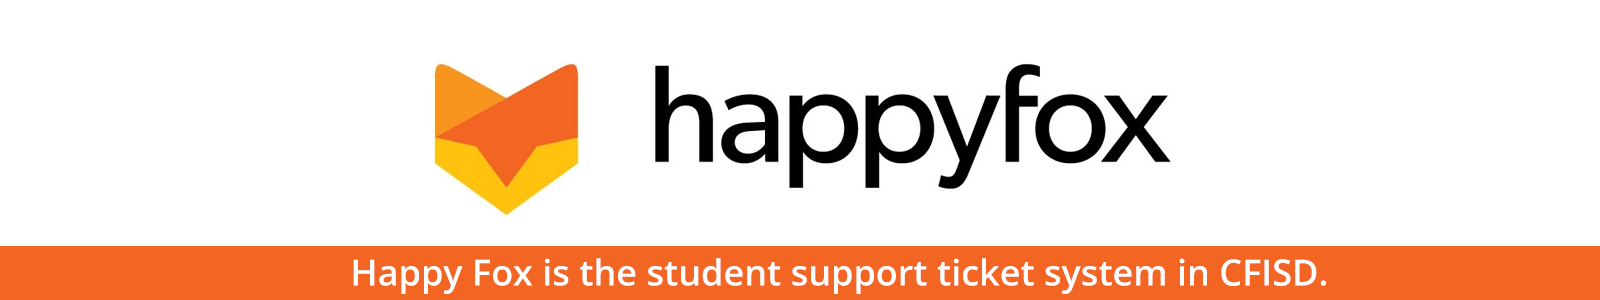 Happy Fox is a student support ticket system